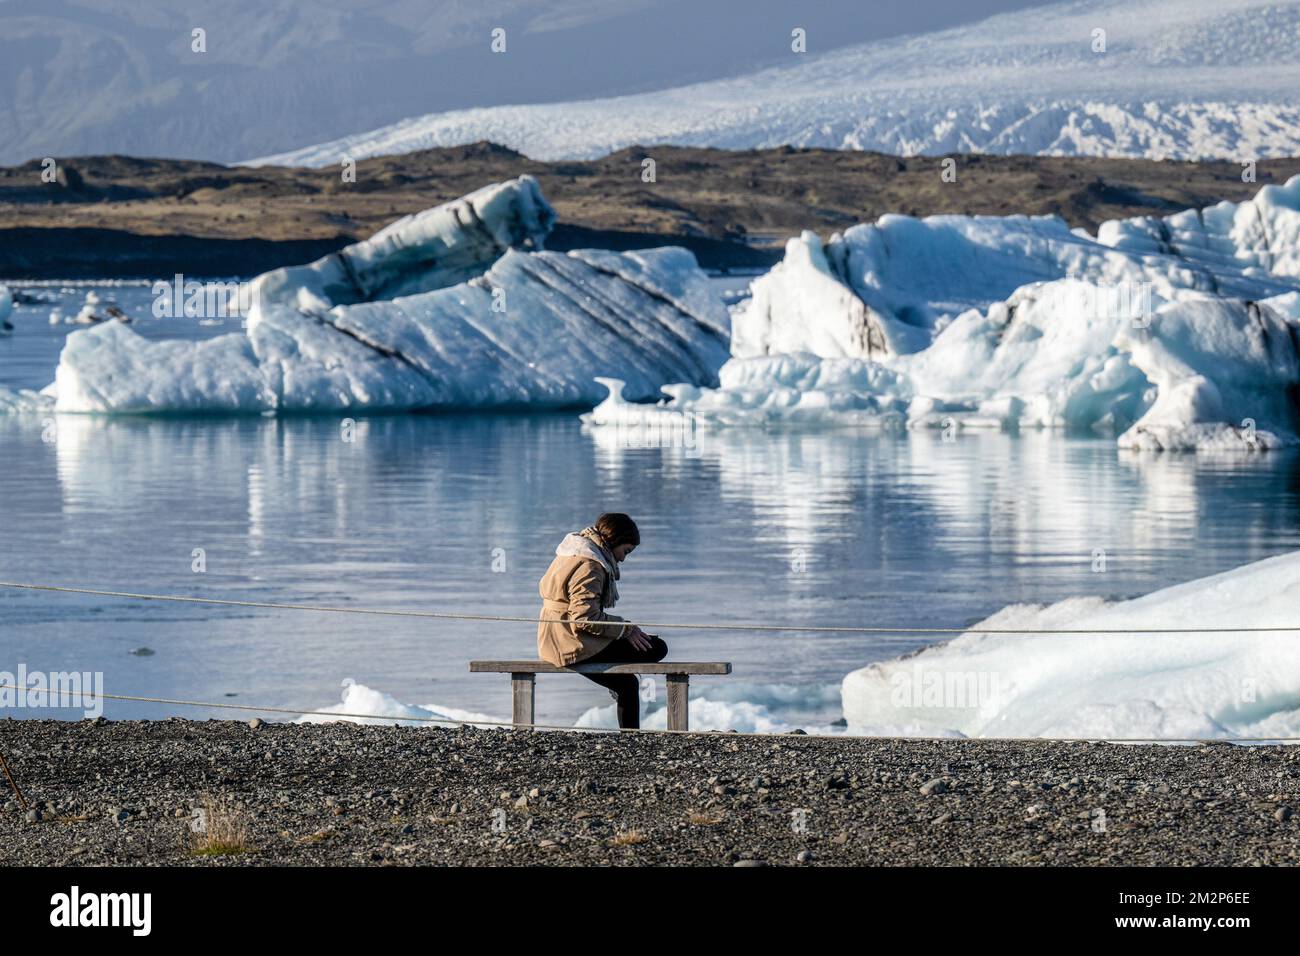 October 19, 2022, JÃ¶kulsÃrlÃ³n, JÃ¶kulsÃrlÃ³n, Iceland: A person is seen resting near the shore of Lake JÃ¶kulsÃrlÃ³n. JÃ¶kulsÃrlÃ³n is a lake located in southern Iceland, with an area of 20 km2 and a depth of over 200 meters. Until less than 100 years ago, the BreiÃ°amerkurjÃ¶kull glacier (part of the VatnajÃ¶kull glacier) extended even beyond the ring road. Due to rising temperatures, the glacier has retreated, creating this impressive glacial lagoon. (Credit Image: © Jorge Castellanos/SOPA Images via ZUMA Press Wire) Stock Photo